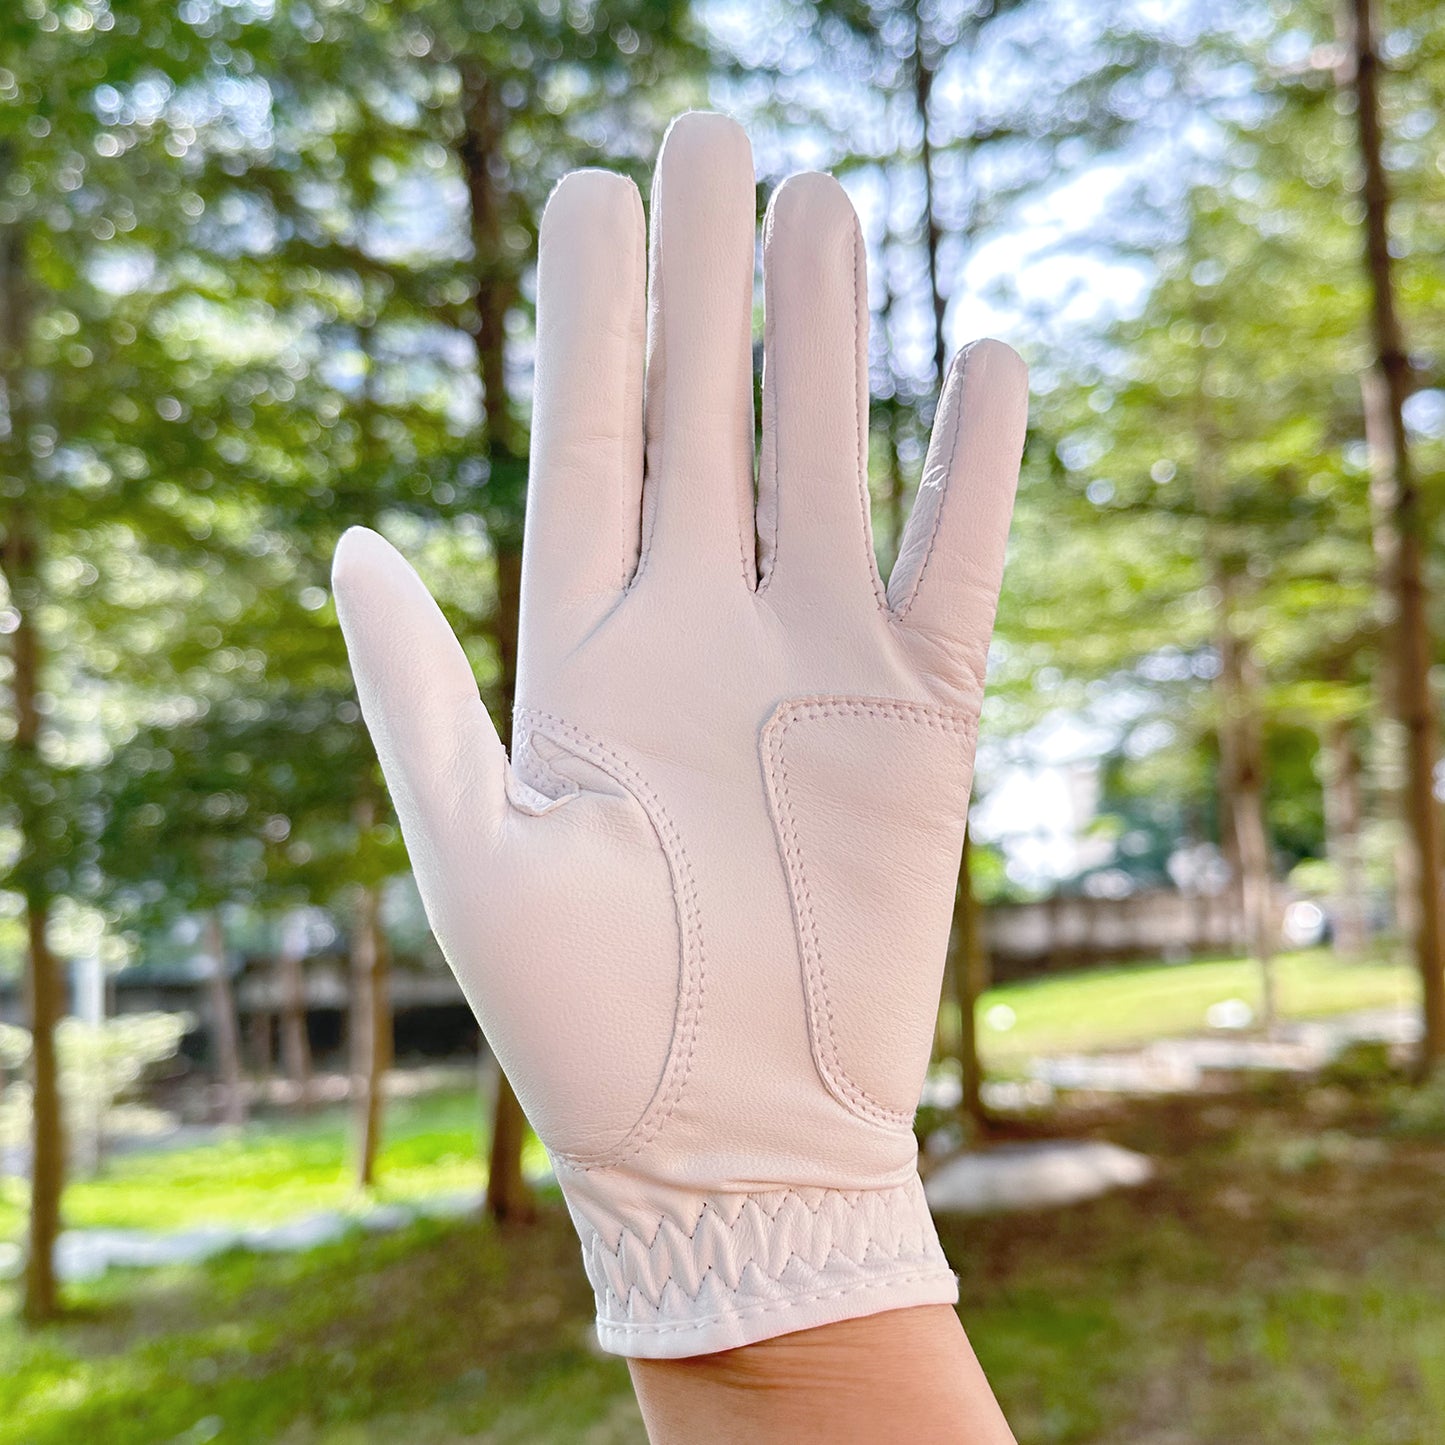 PINKTEE Women’s Leather Golf Glove with Removable Golf Ball Marker Full Finger Fit Size S M L XL